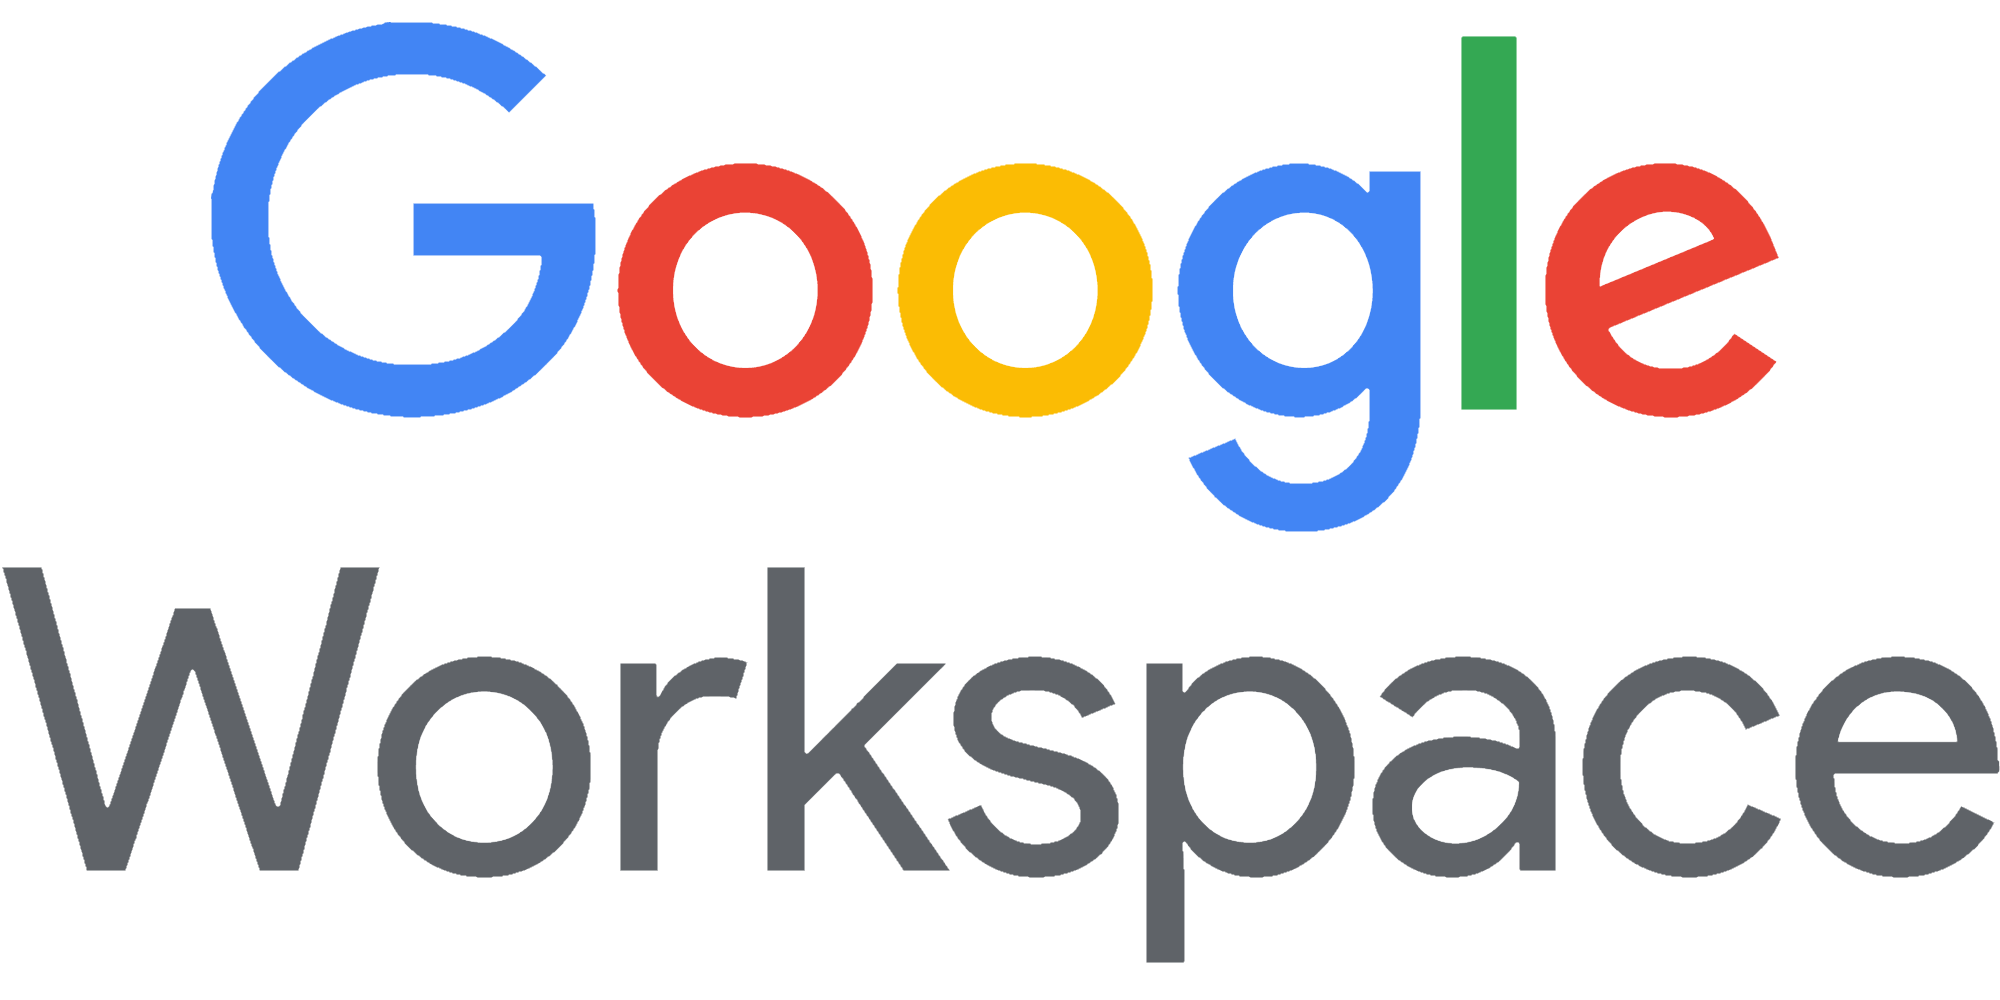 Google Expands Workspace Suite Offering to All Users amid Growing Remote Work